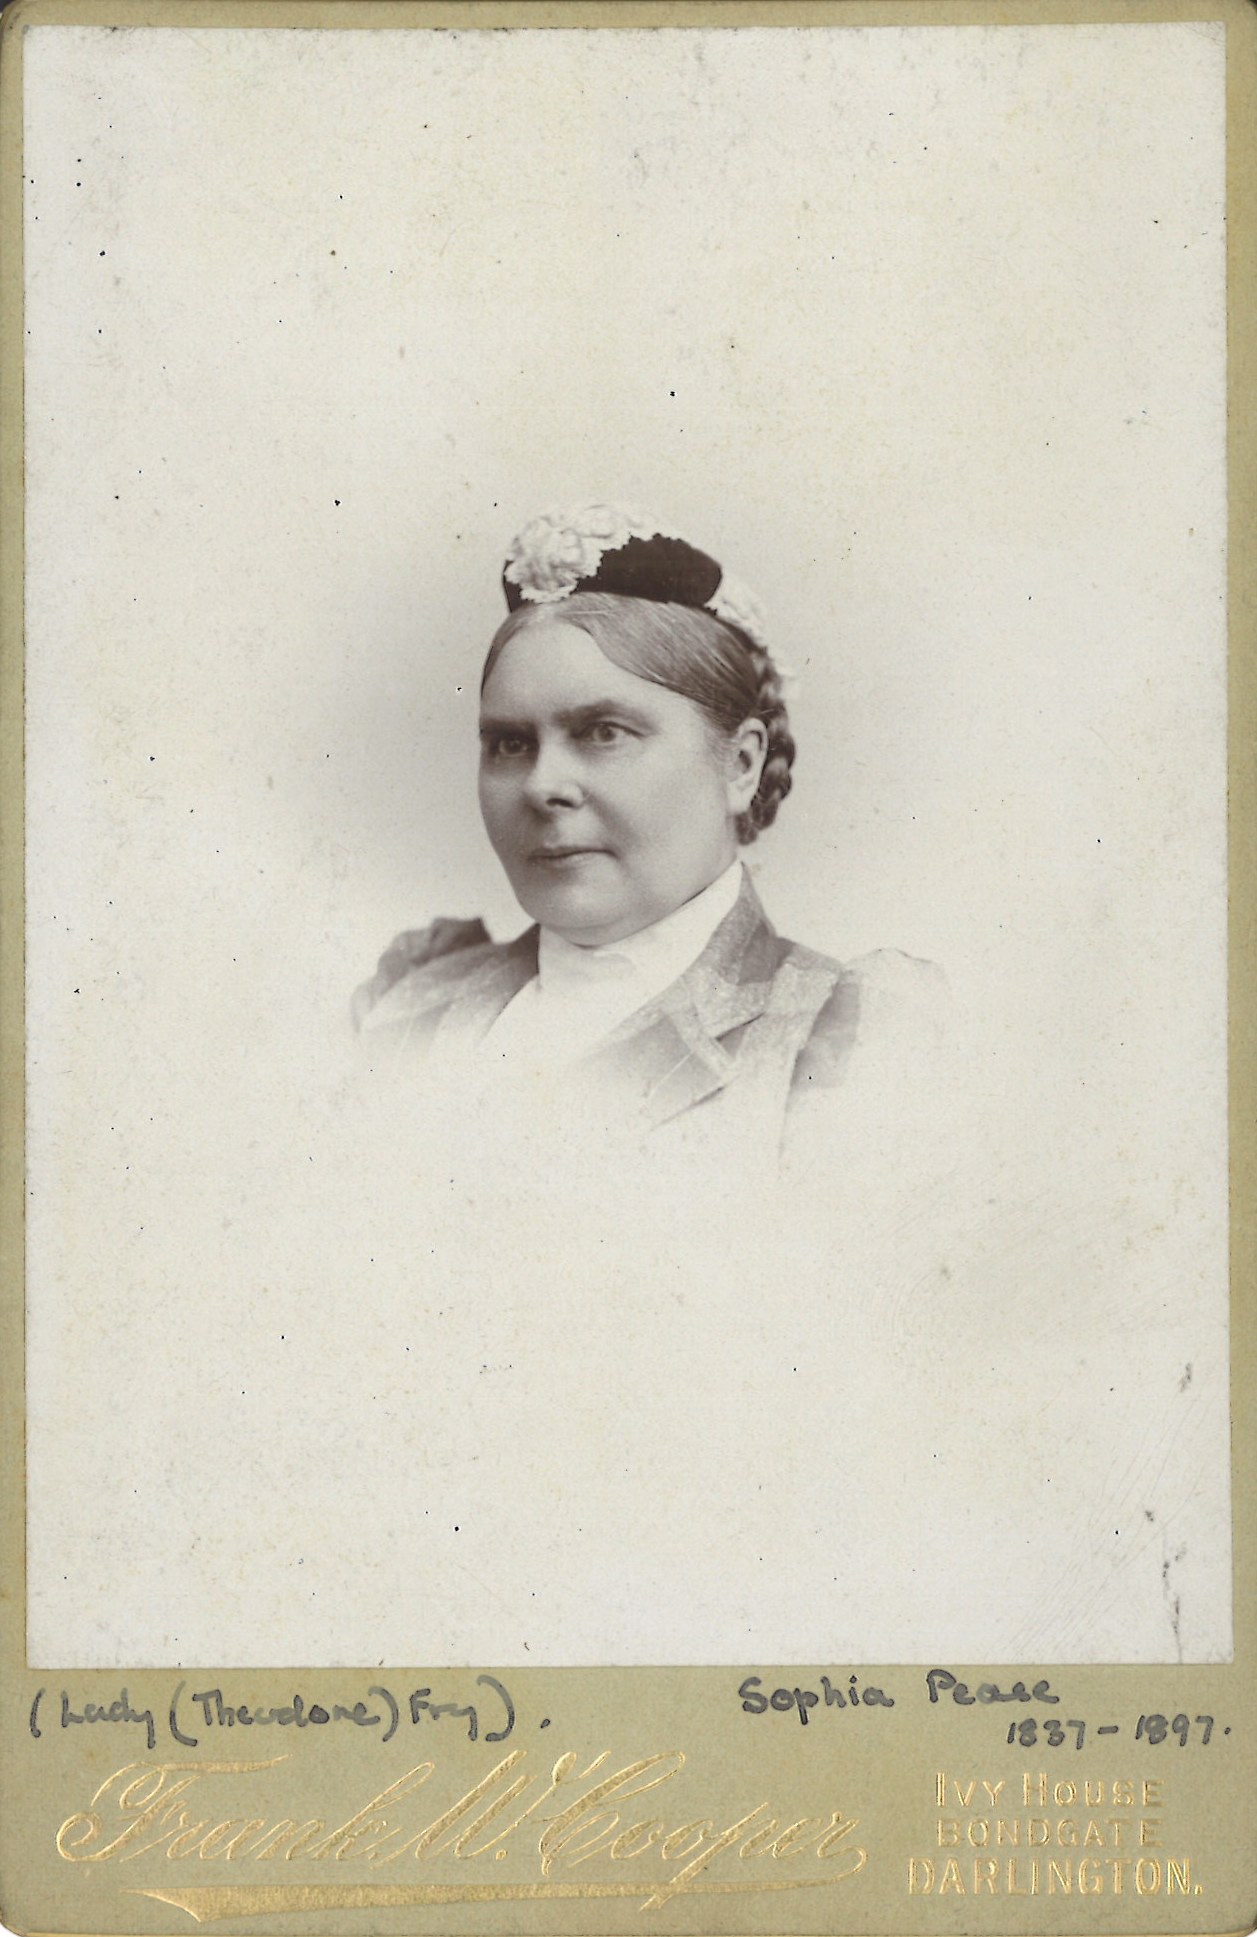 Sophia Fry - Image courtesy of the Centre for Local Studies at Darlington Library